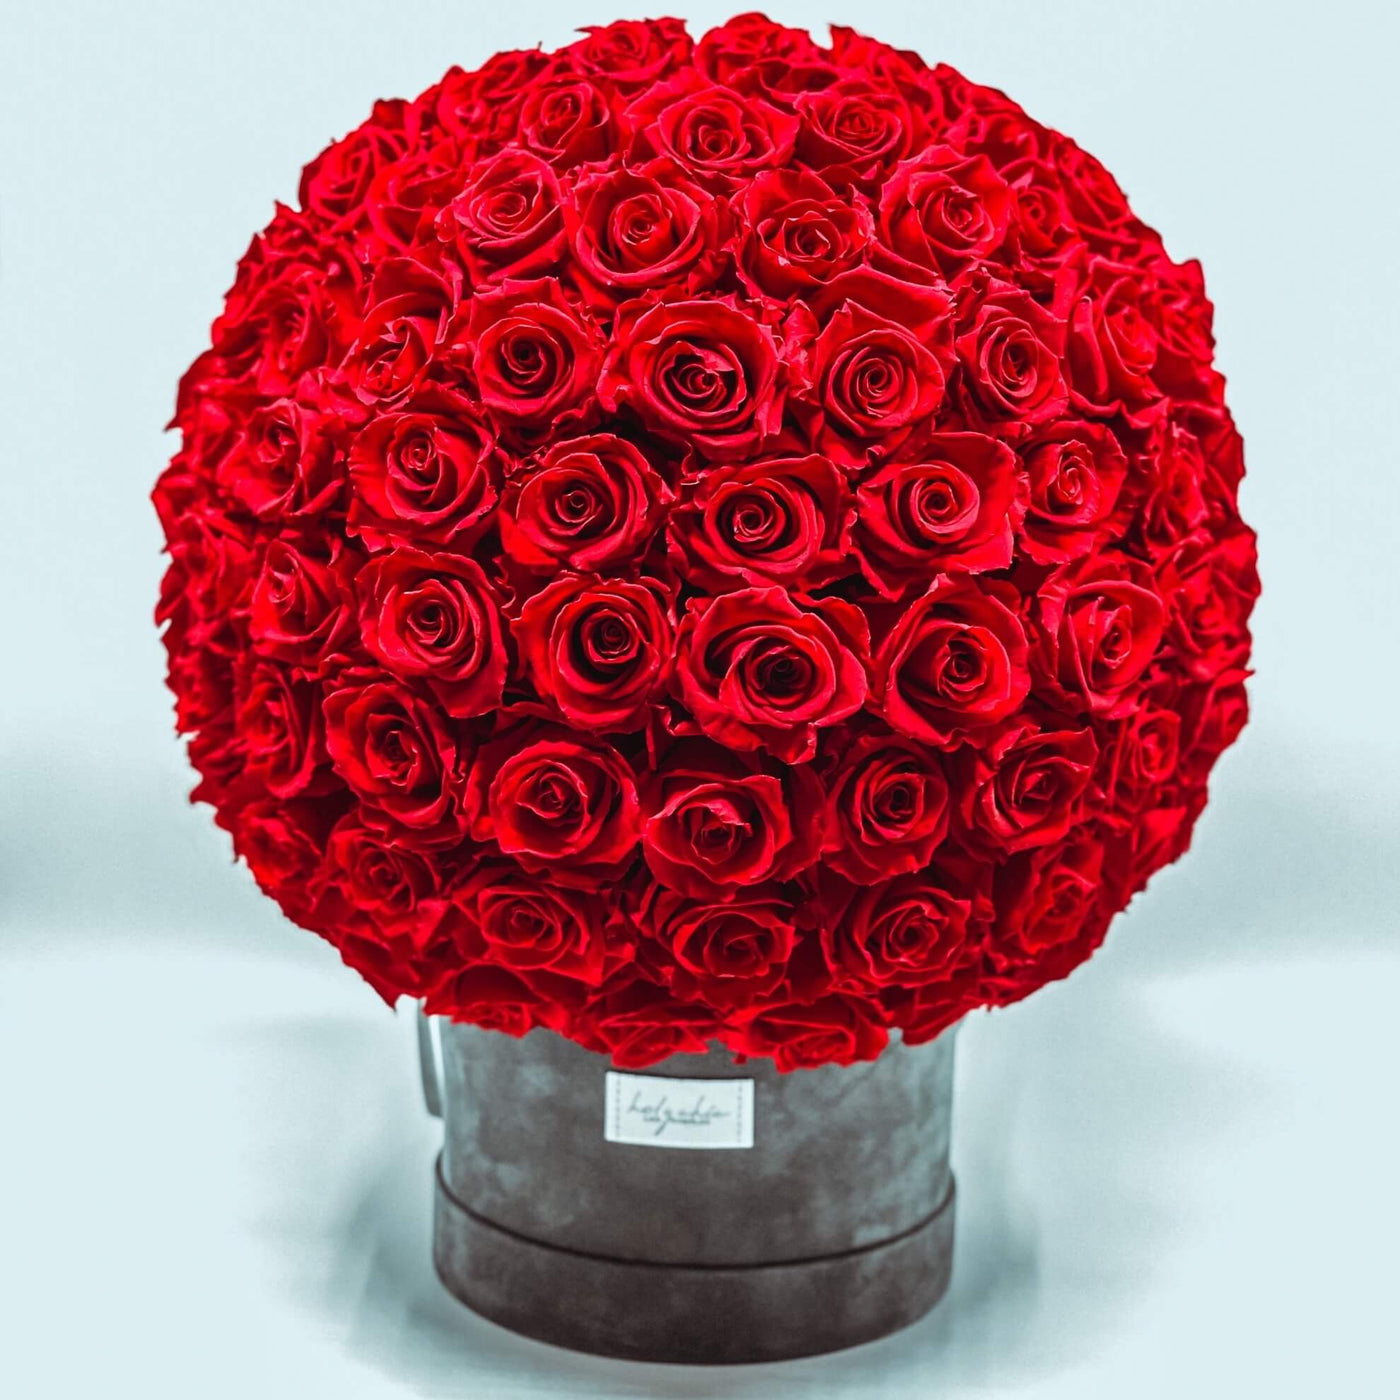 Forever roses set as a dome in a large round suede box 